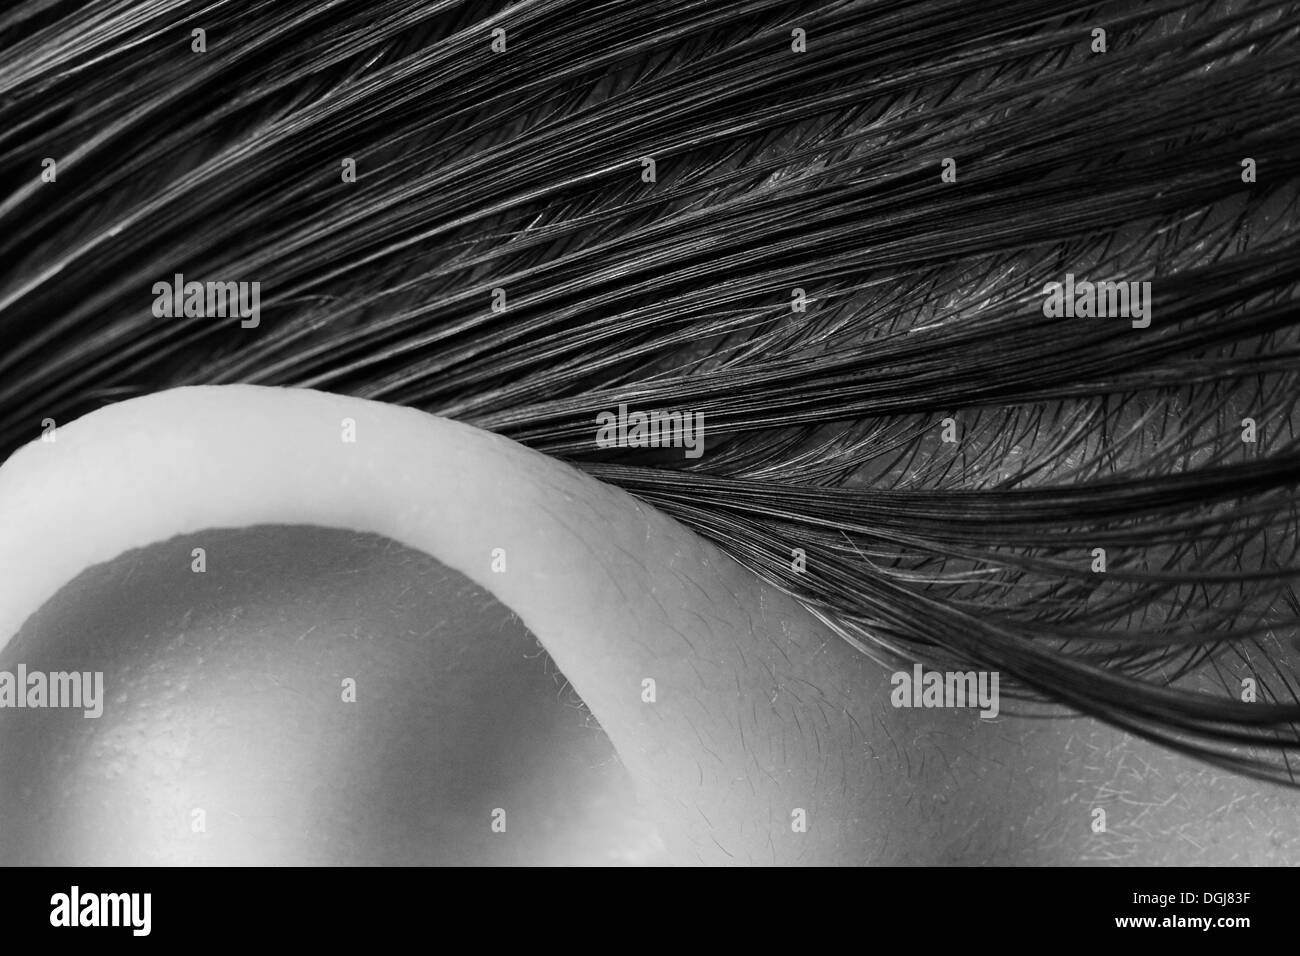 Close up view of a womans ear and hairline. Stock Photo